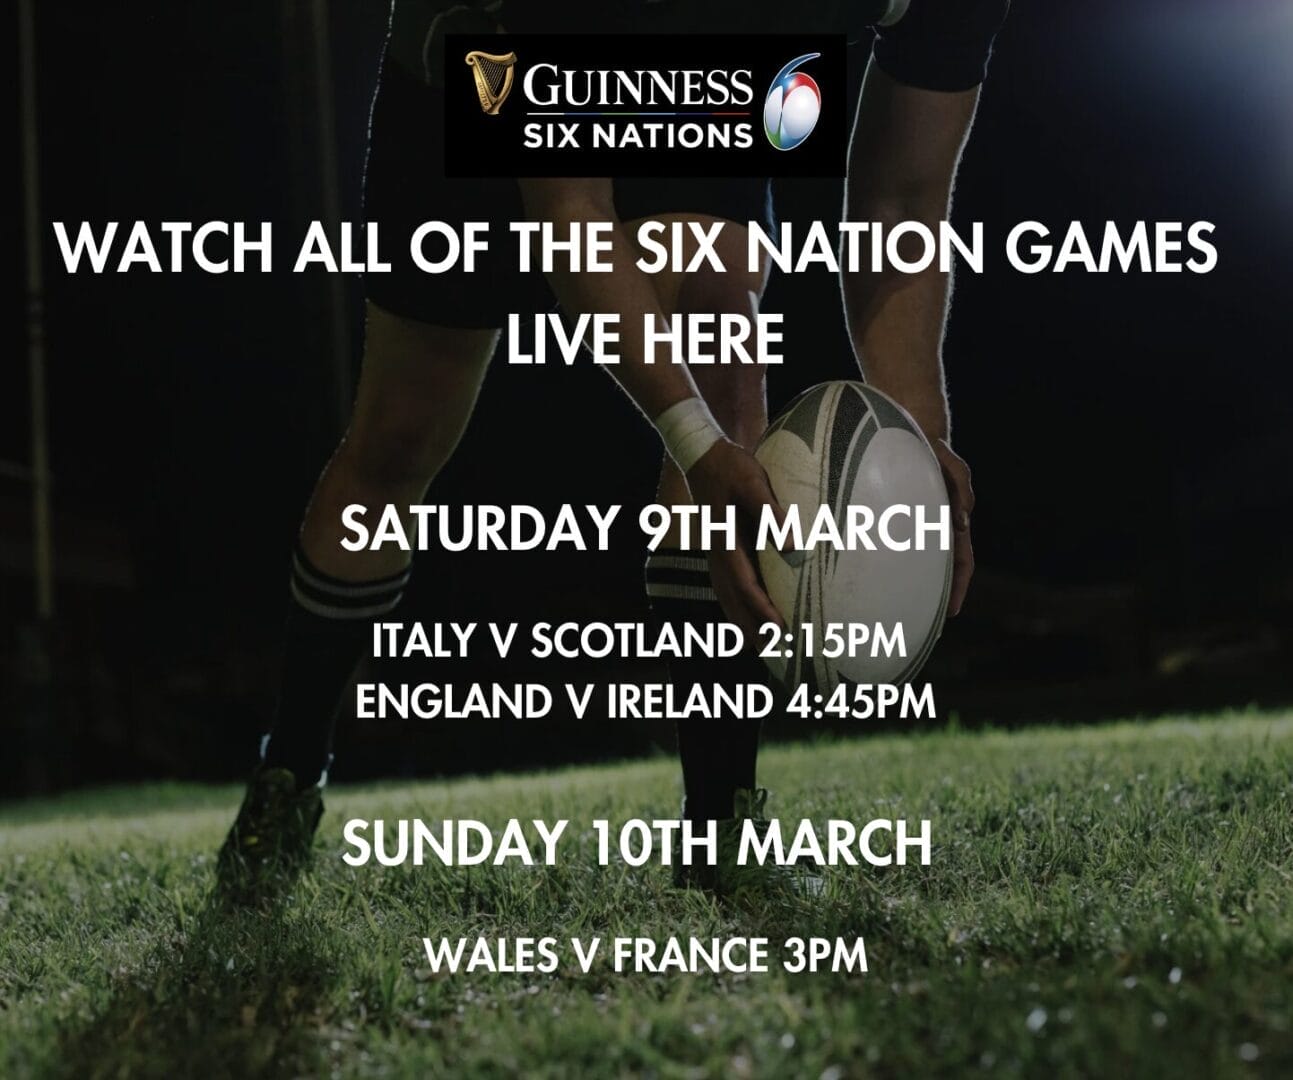 Pubs In Portsmouth Showing The Rugby - Watch all The Action At The Mother Shipton !